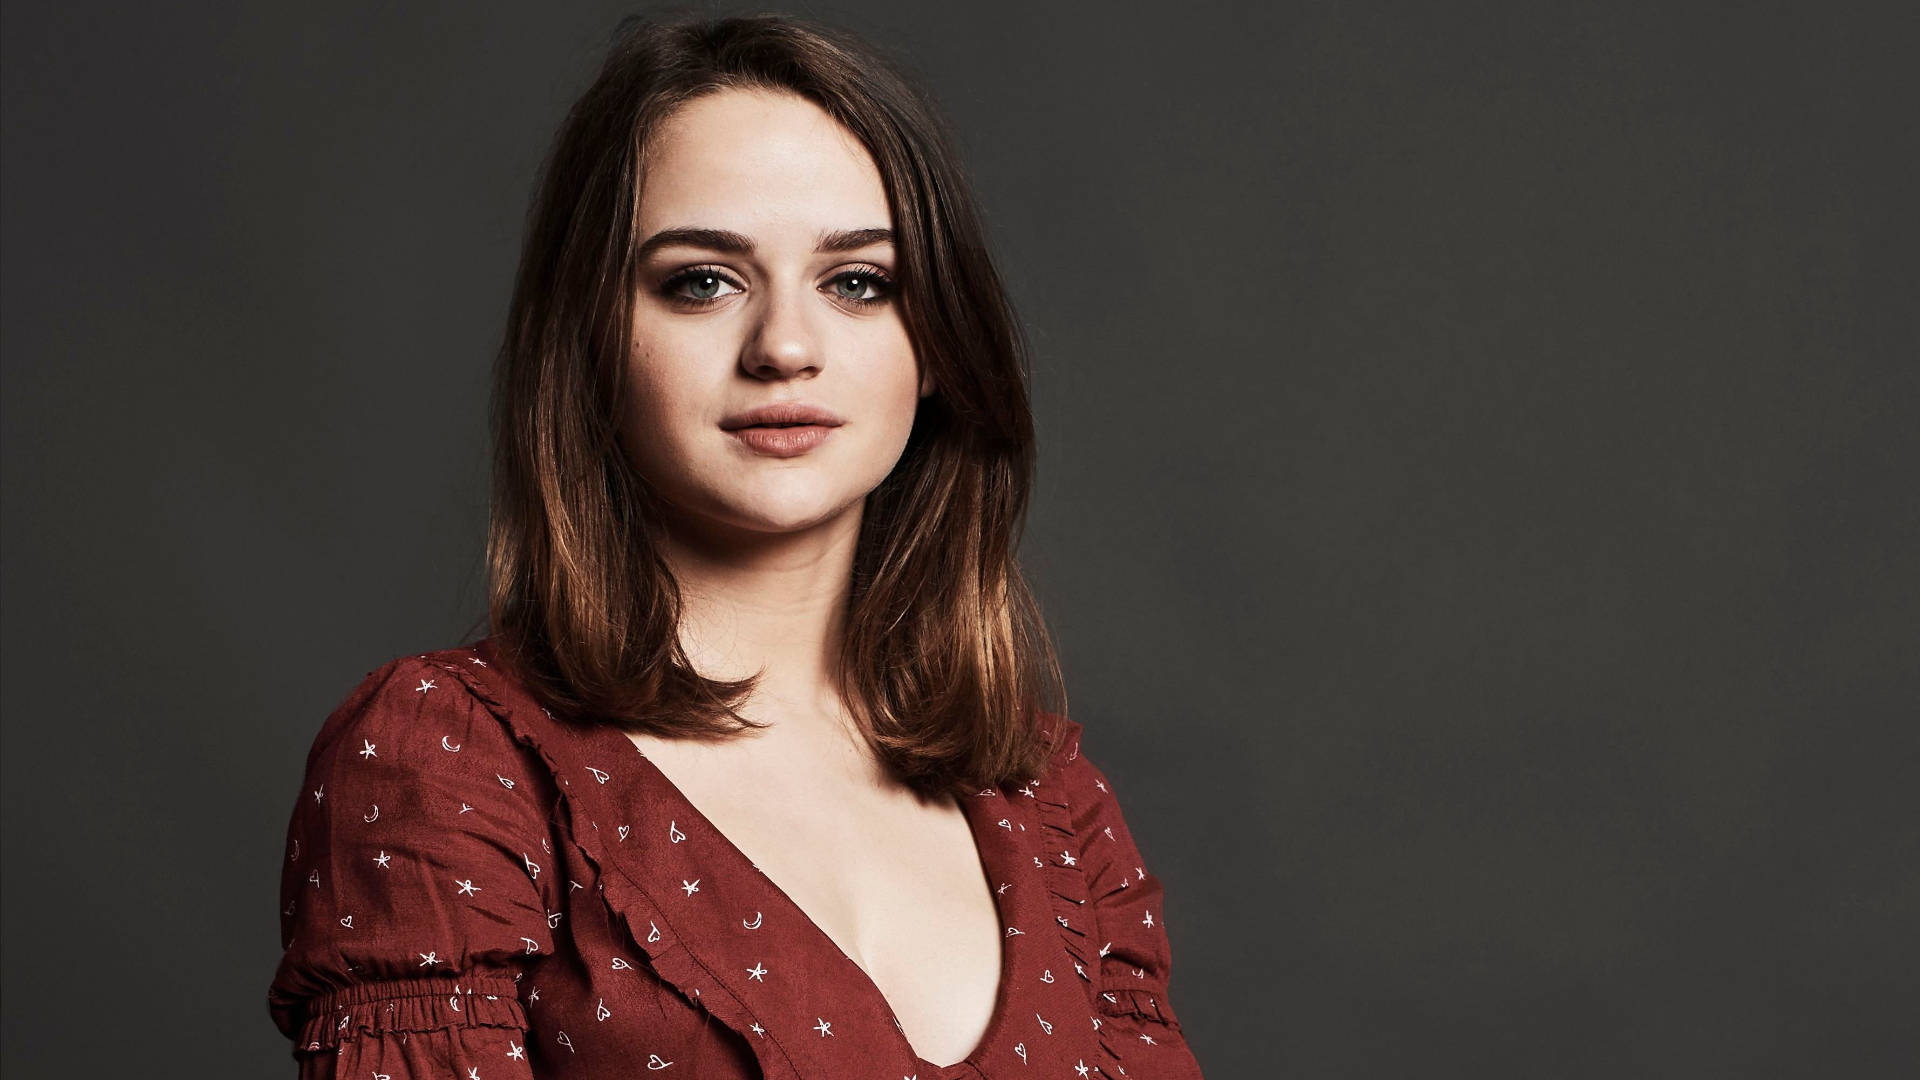 Joey King Simple Casual Background